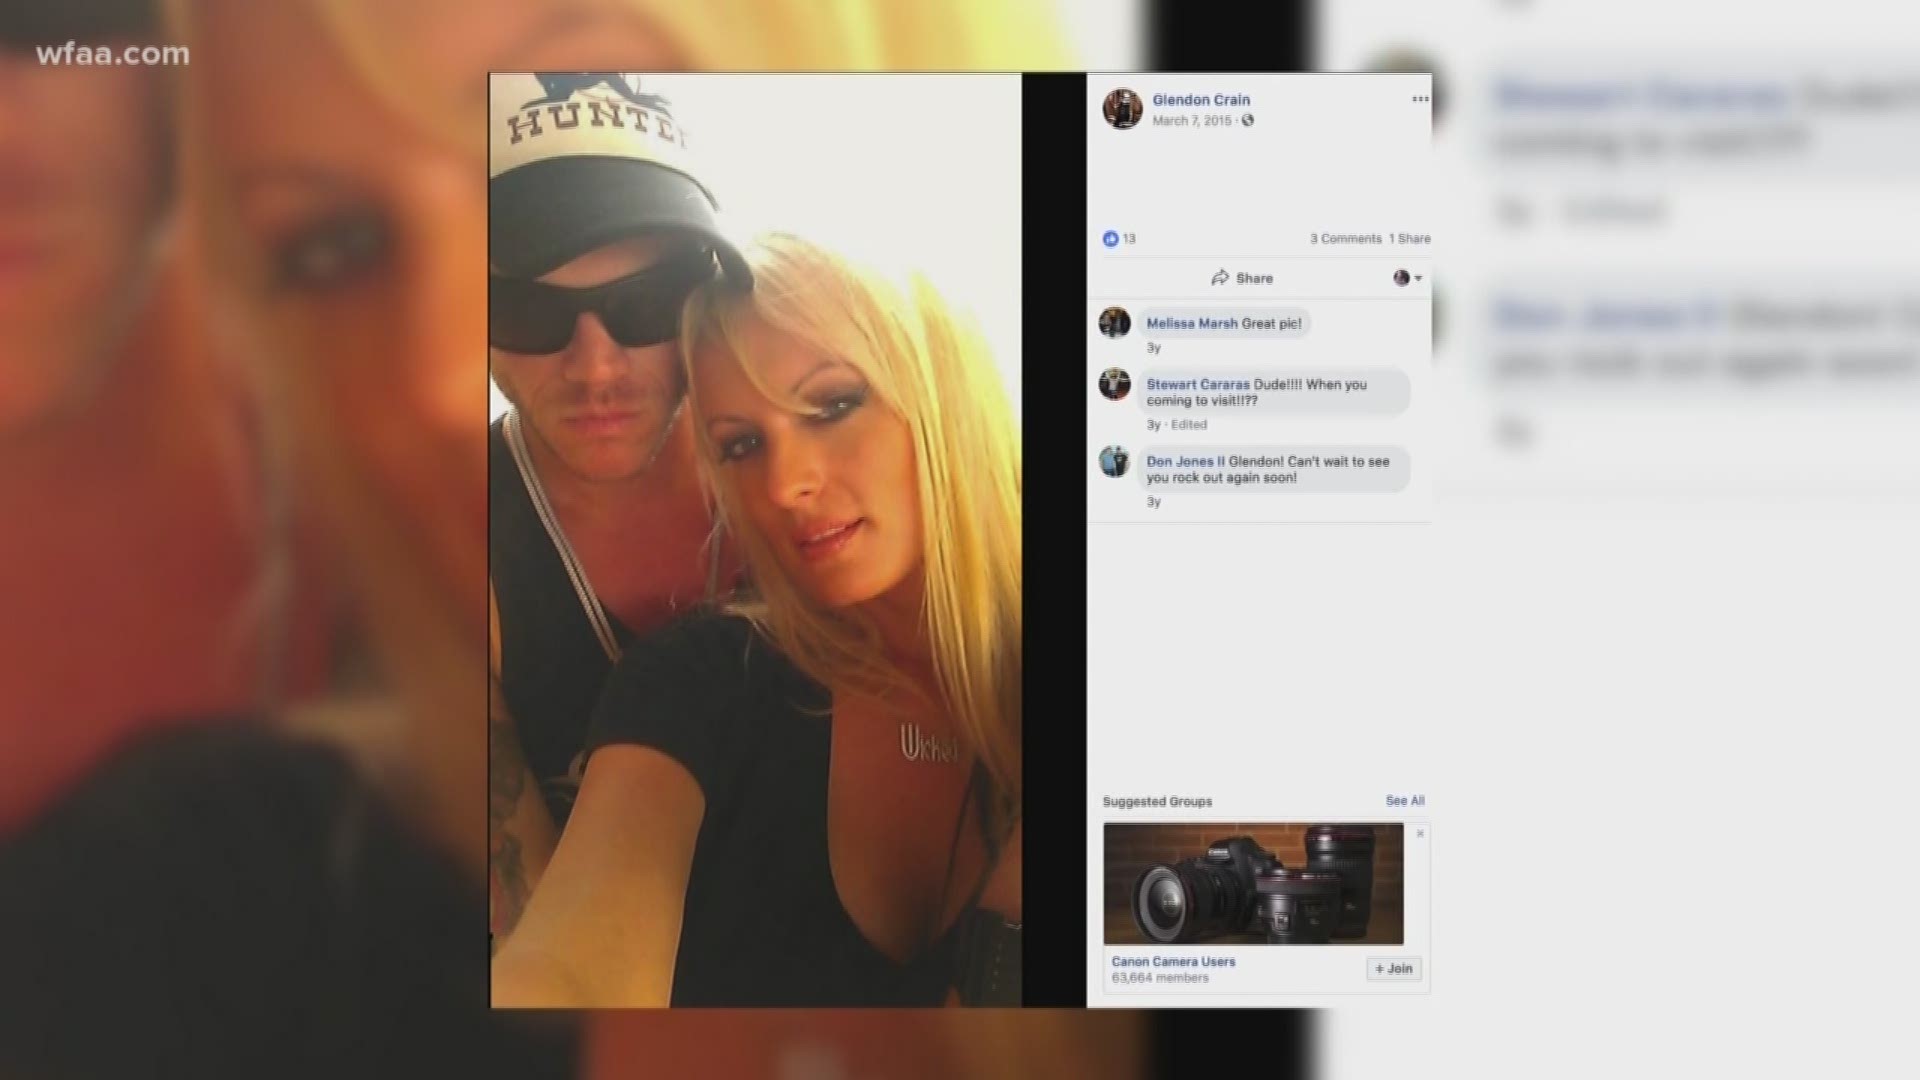 Daniels, also known as Stephanie Clifford, is in the process of getting a divorce from Glendon Crain, a fellow adult film actor. 